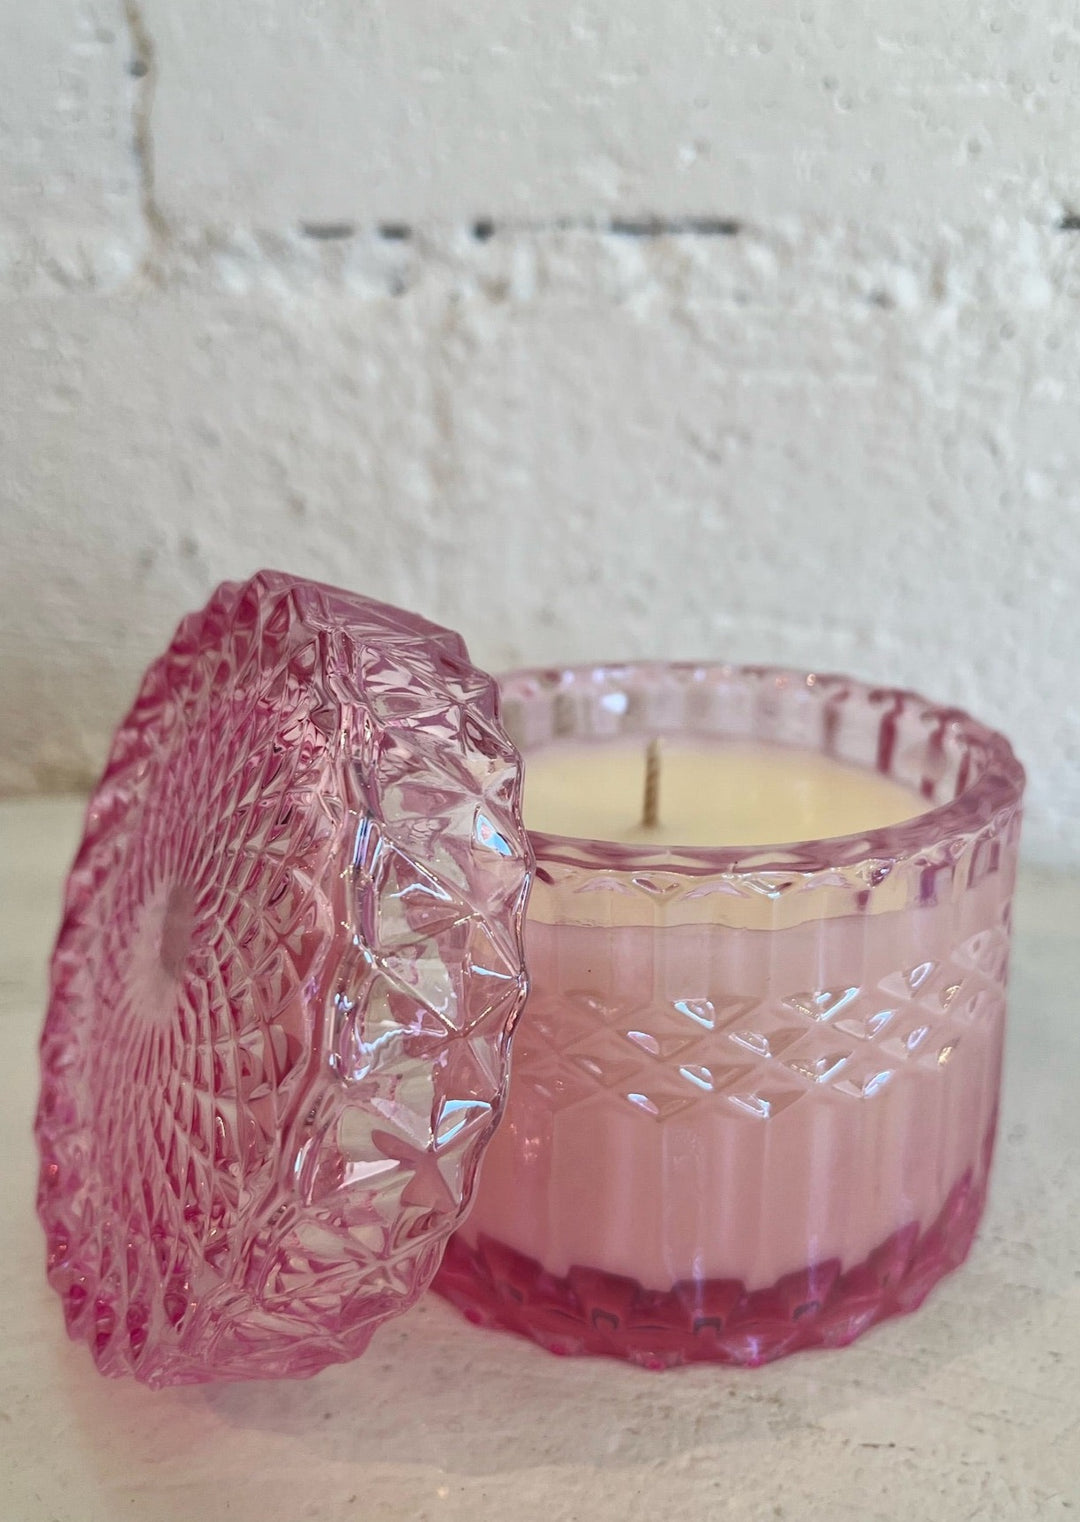 8oz Petite Shimmer Candle, Miscellaneous, Adeline, Adeline, dallas boutique, dallas texas, texas boutique, women's boutique dallas, adeline boutique, dallas boutique, trendy boutique, affordable boutique